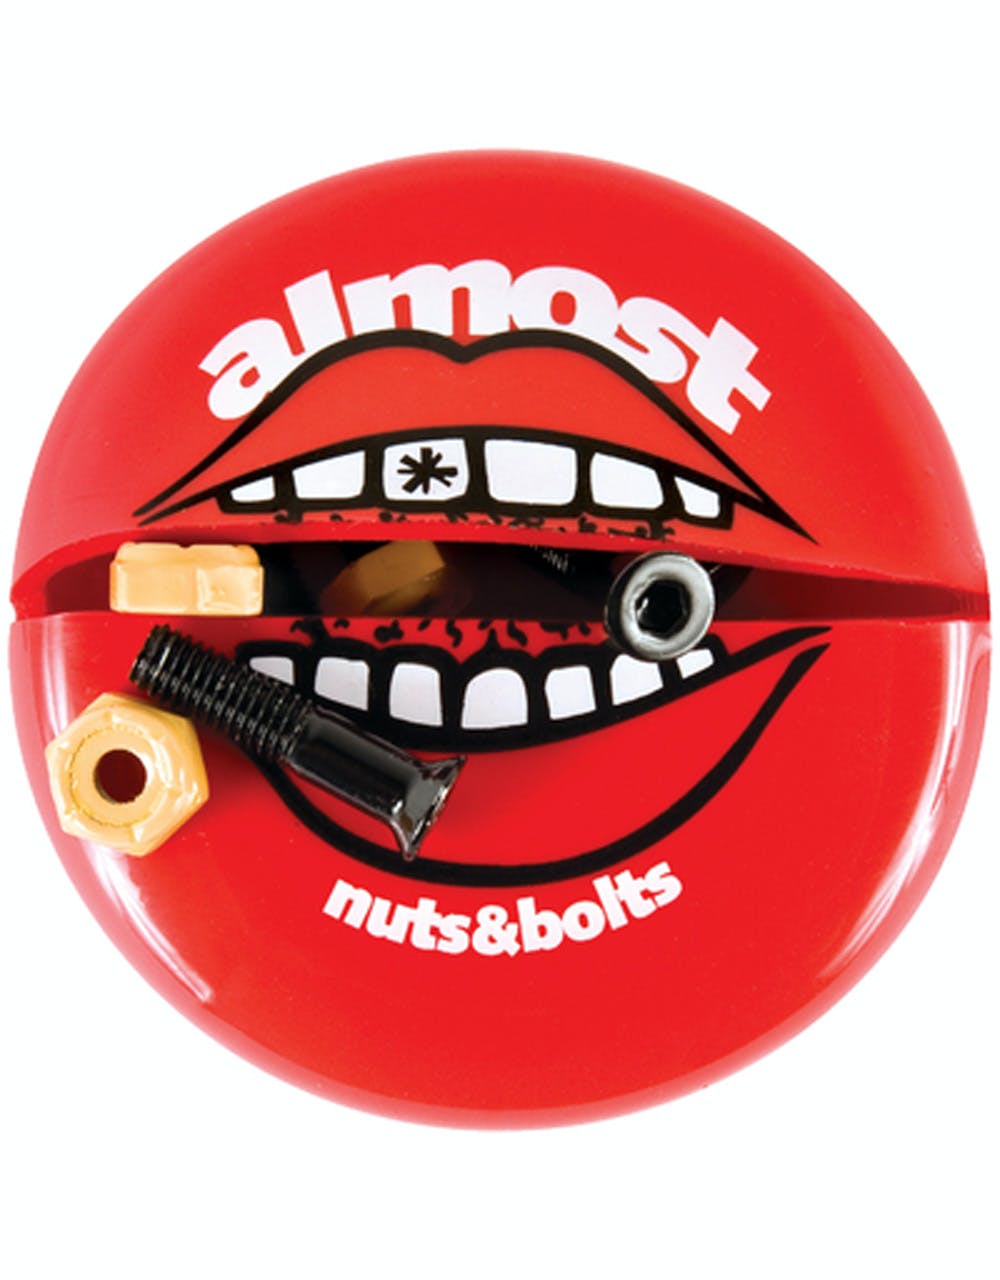 Almost Nuts & Bolts In Your Mouth 7/8" Allen Bolts